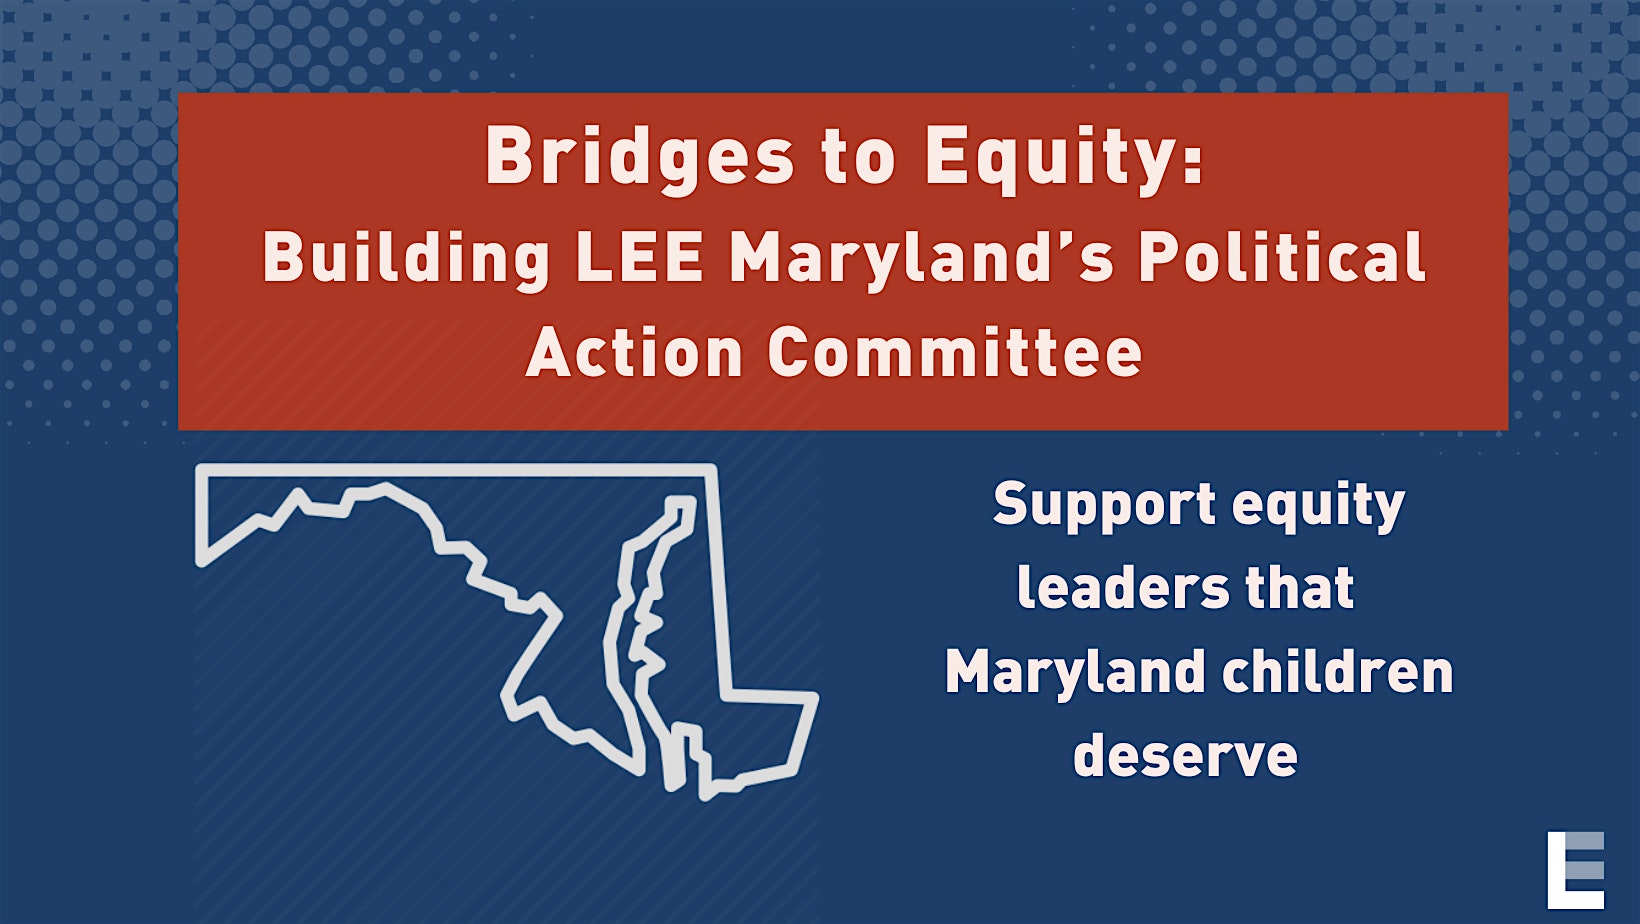 Bridges to Equity: Building LEE Maryland's Political Action Committee